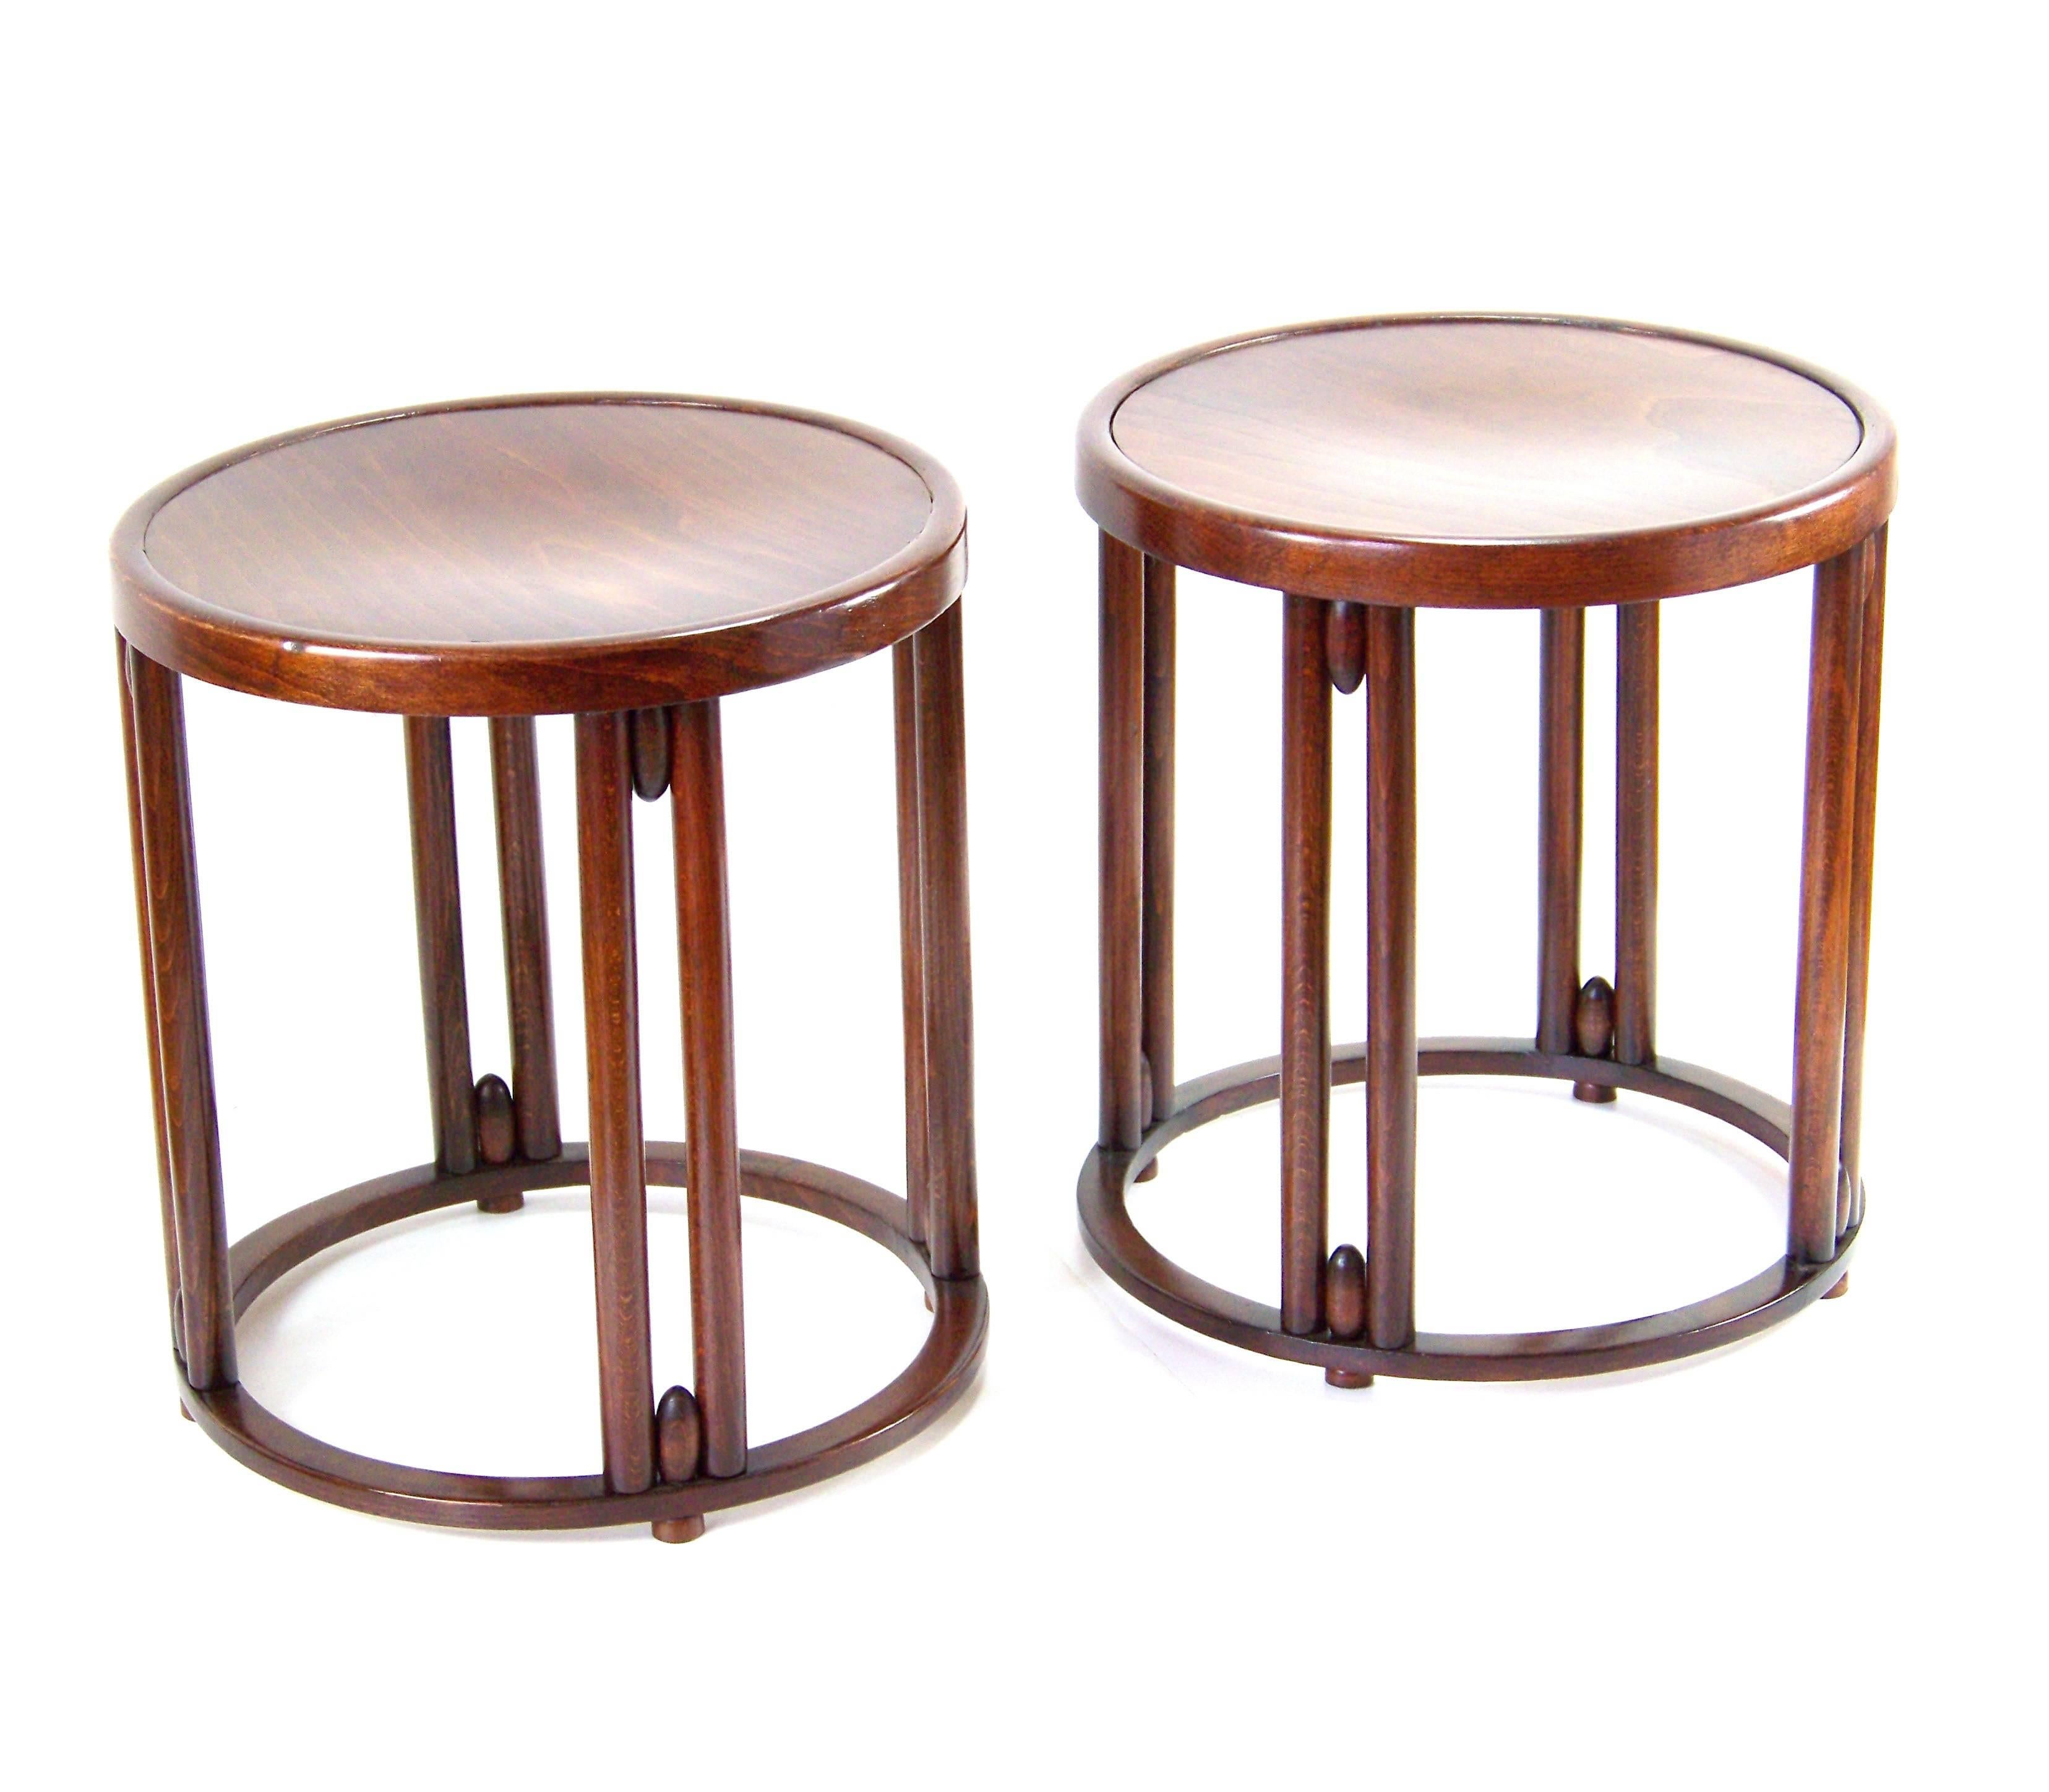 Viennese Secession stools Nr.728 was designed by Josef Hoffmann for company Jacob&Josef Kohn around year 1905. In year 1907 was these furniture model used in the famous Viennese café Fledermaus. But according to the construction details, was these